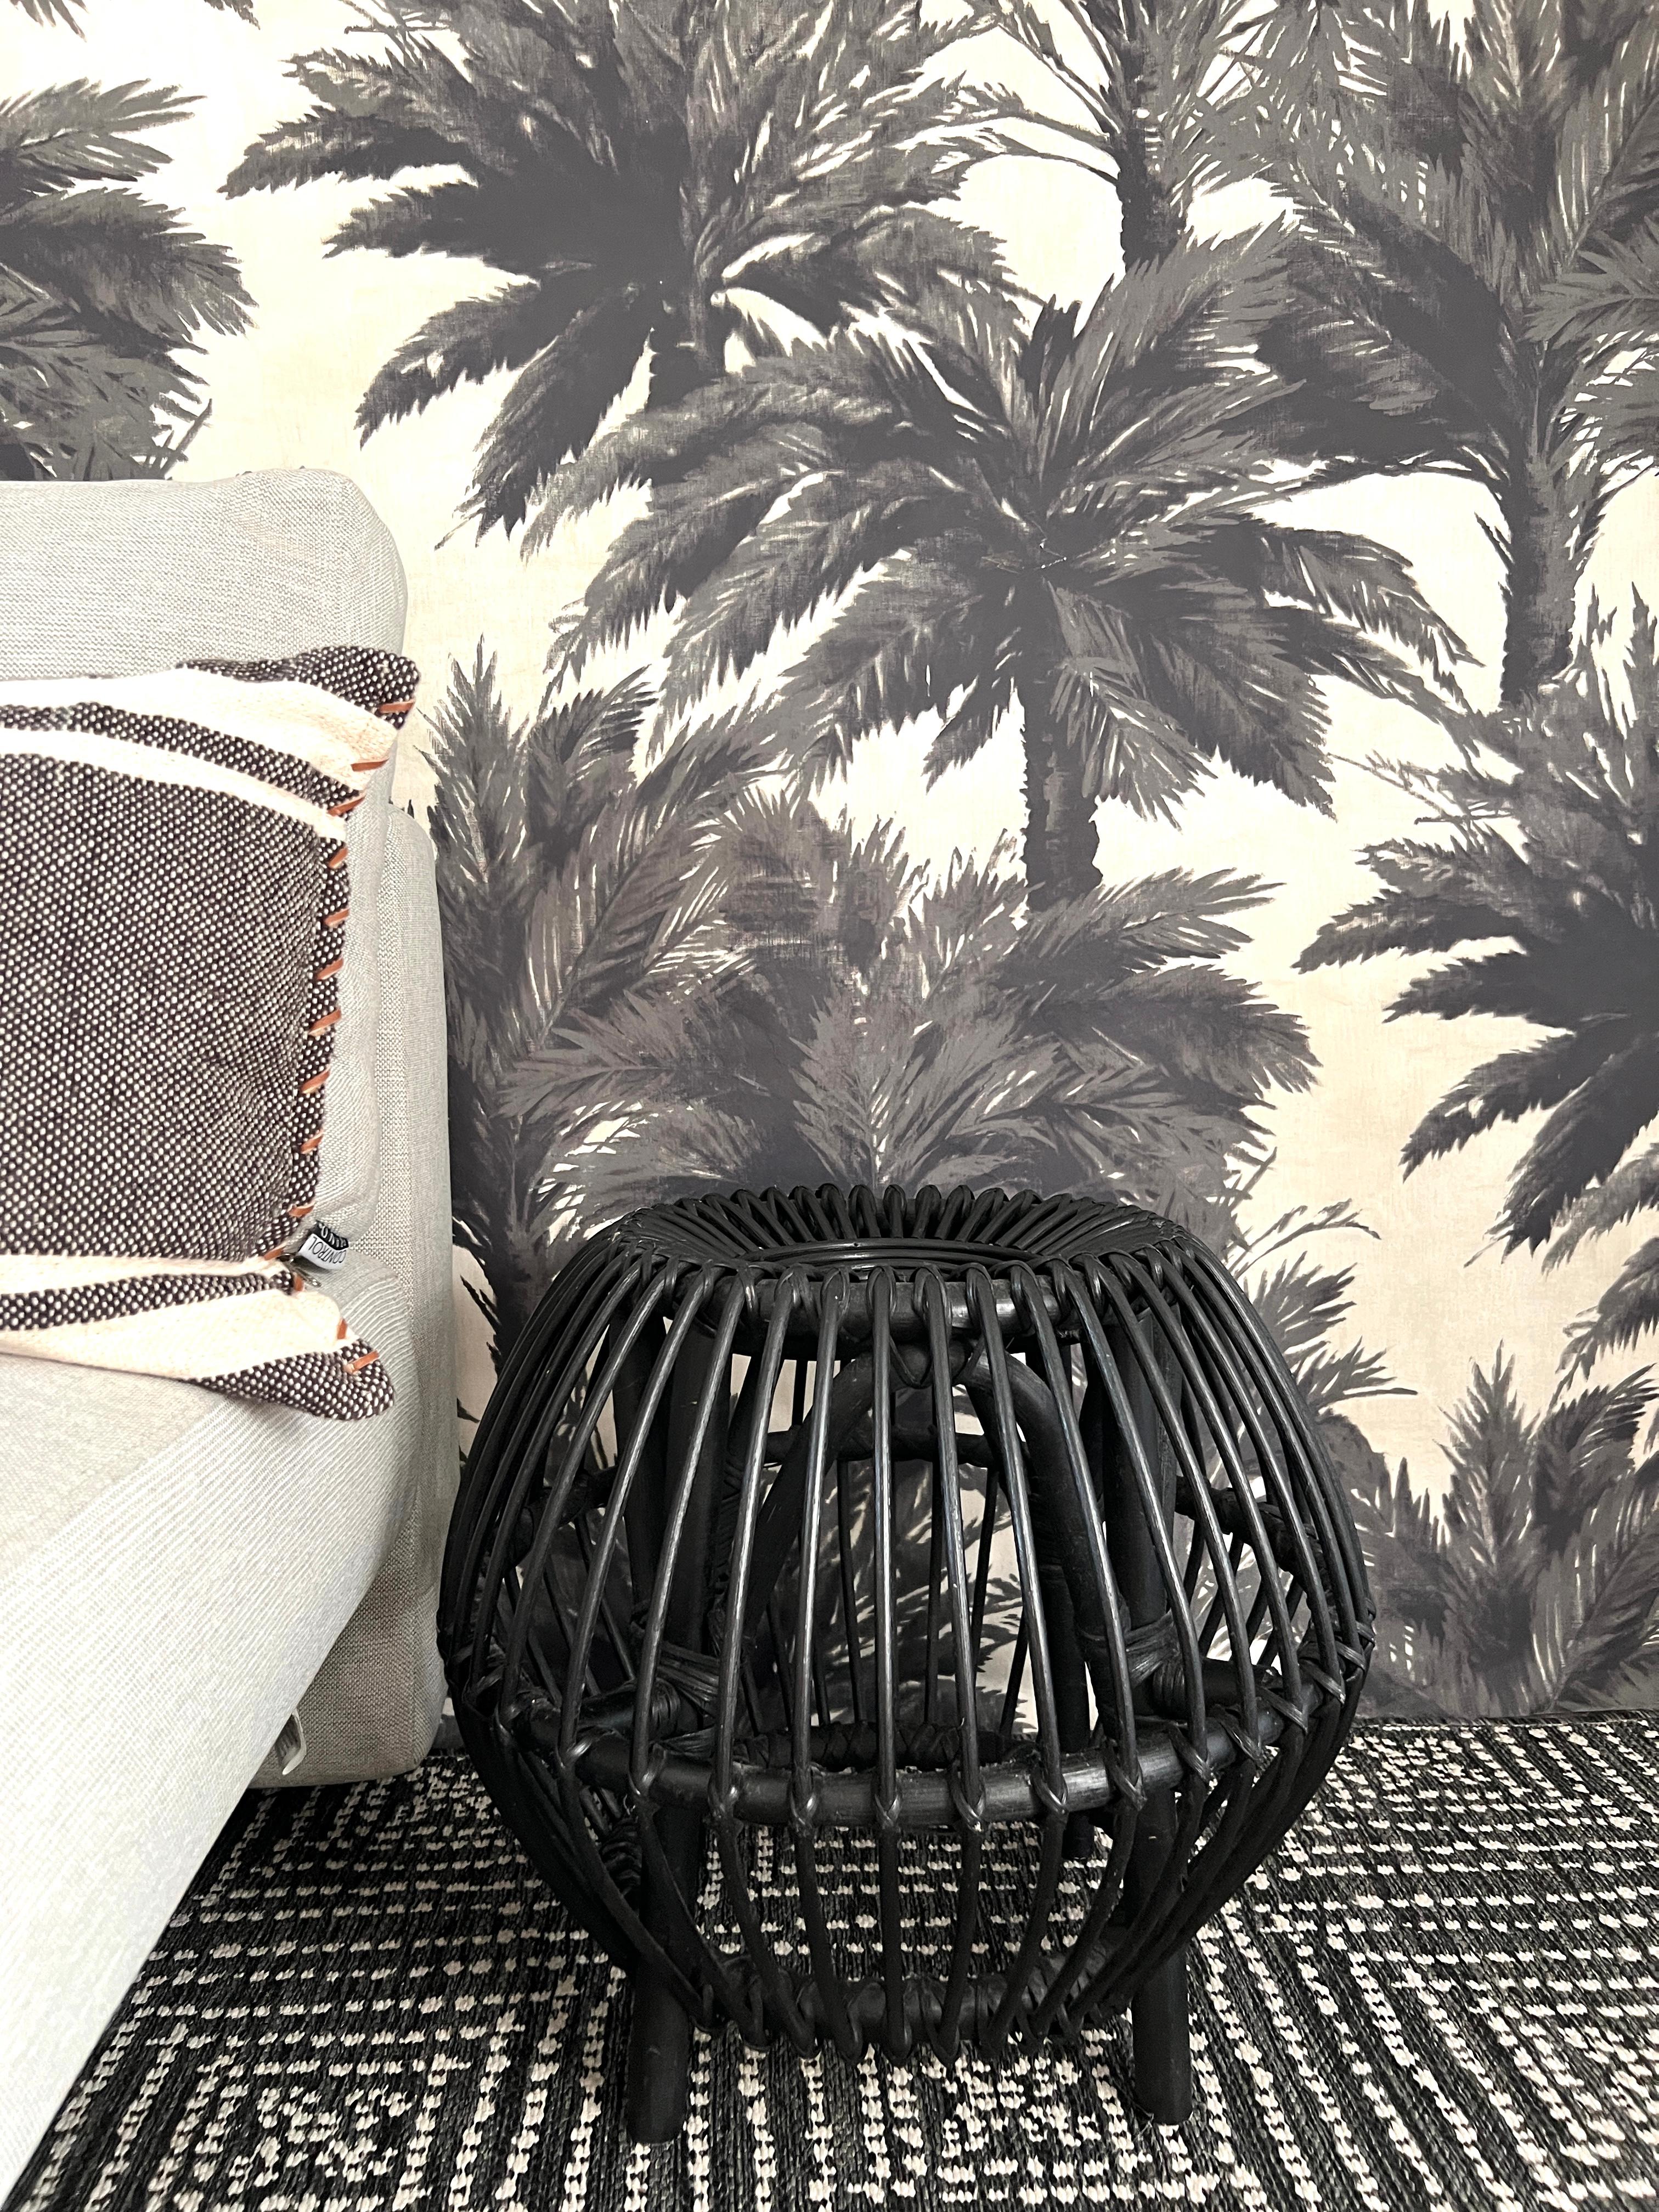 Hand-woven vintage ottoman in matte black rattan. The footed stool has a stylized round shape with organic open weave design. Versatile in functionality, this rustic item works as an ottoman, a side table, or as a design element in any room. Can be